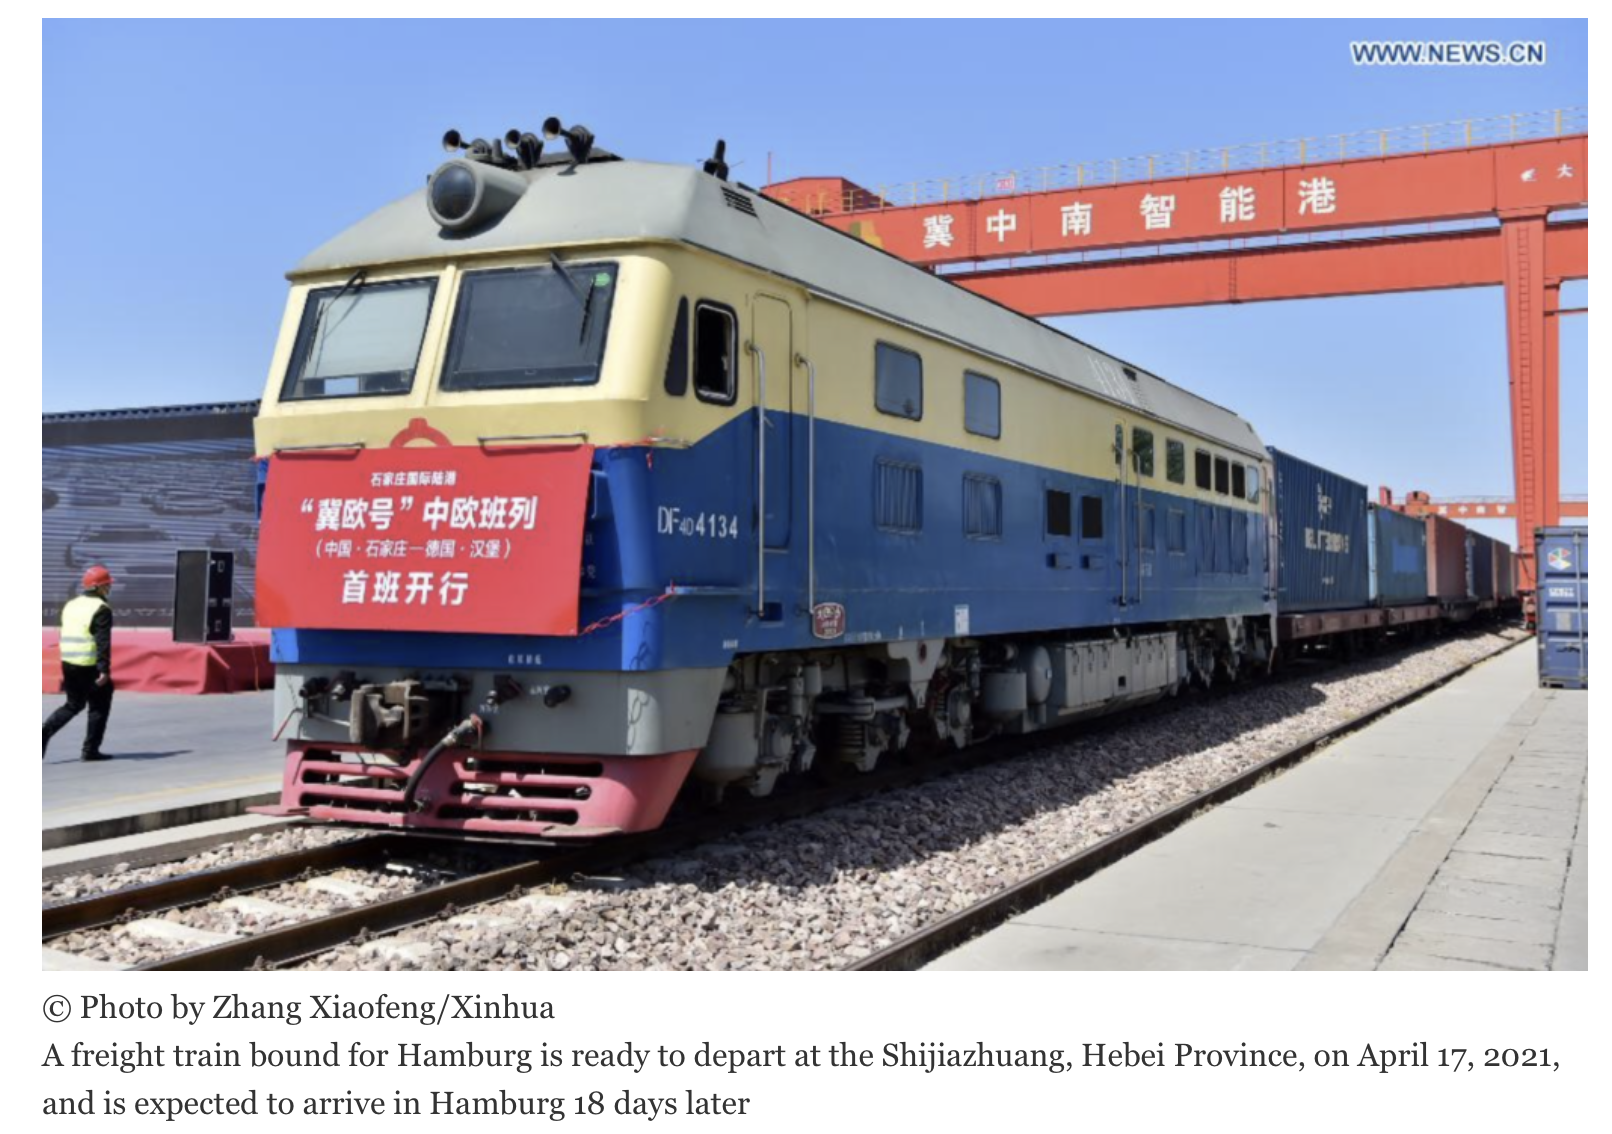 2021/03 Rail freight from China to Europe raises as Europe become China’s main trading partner